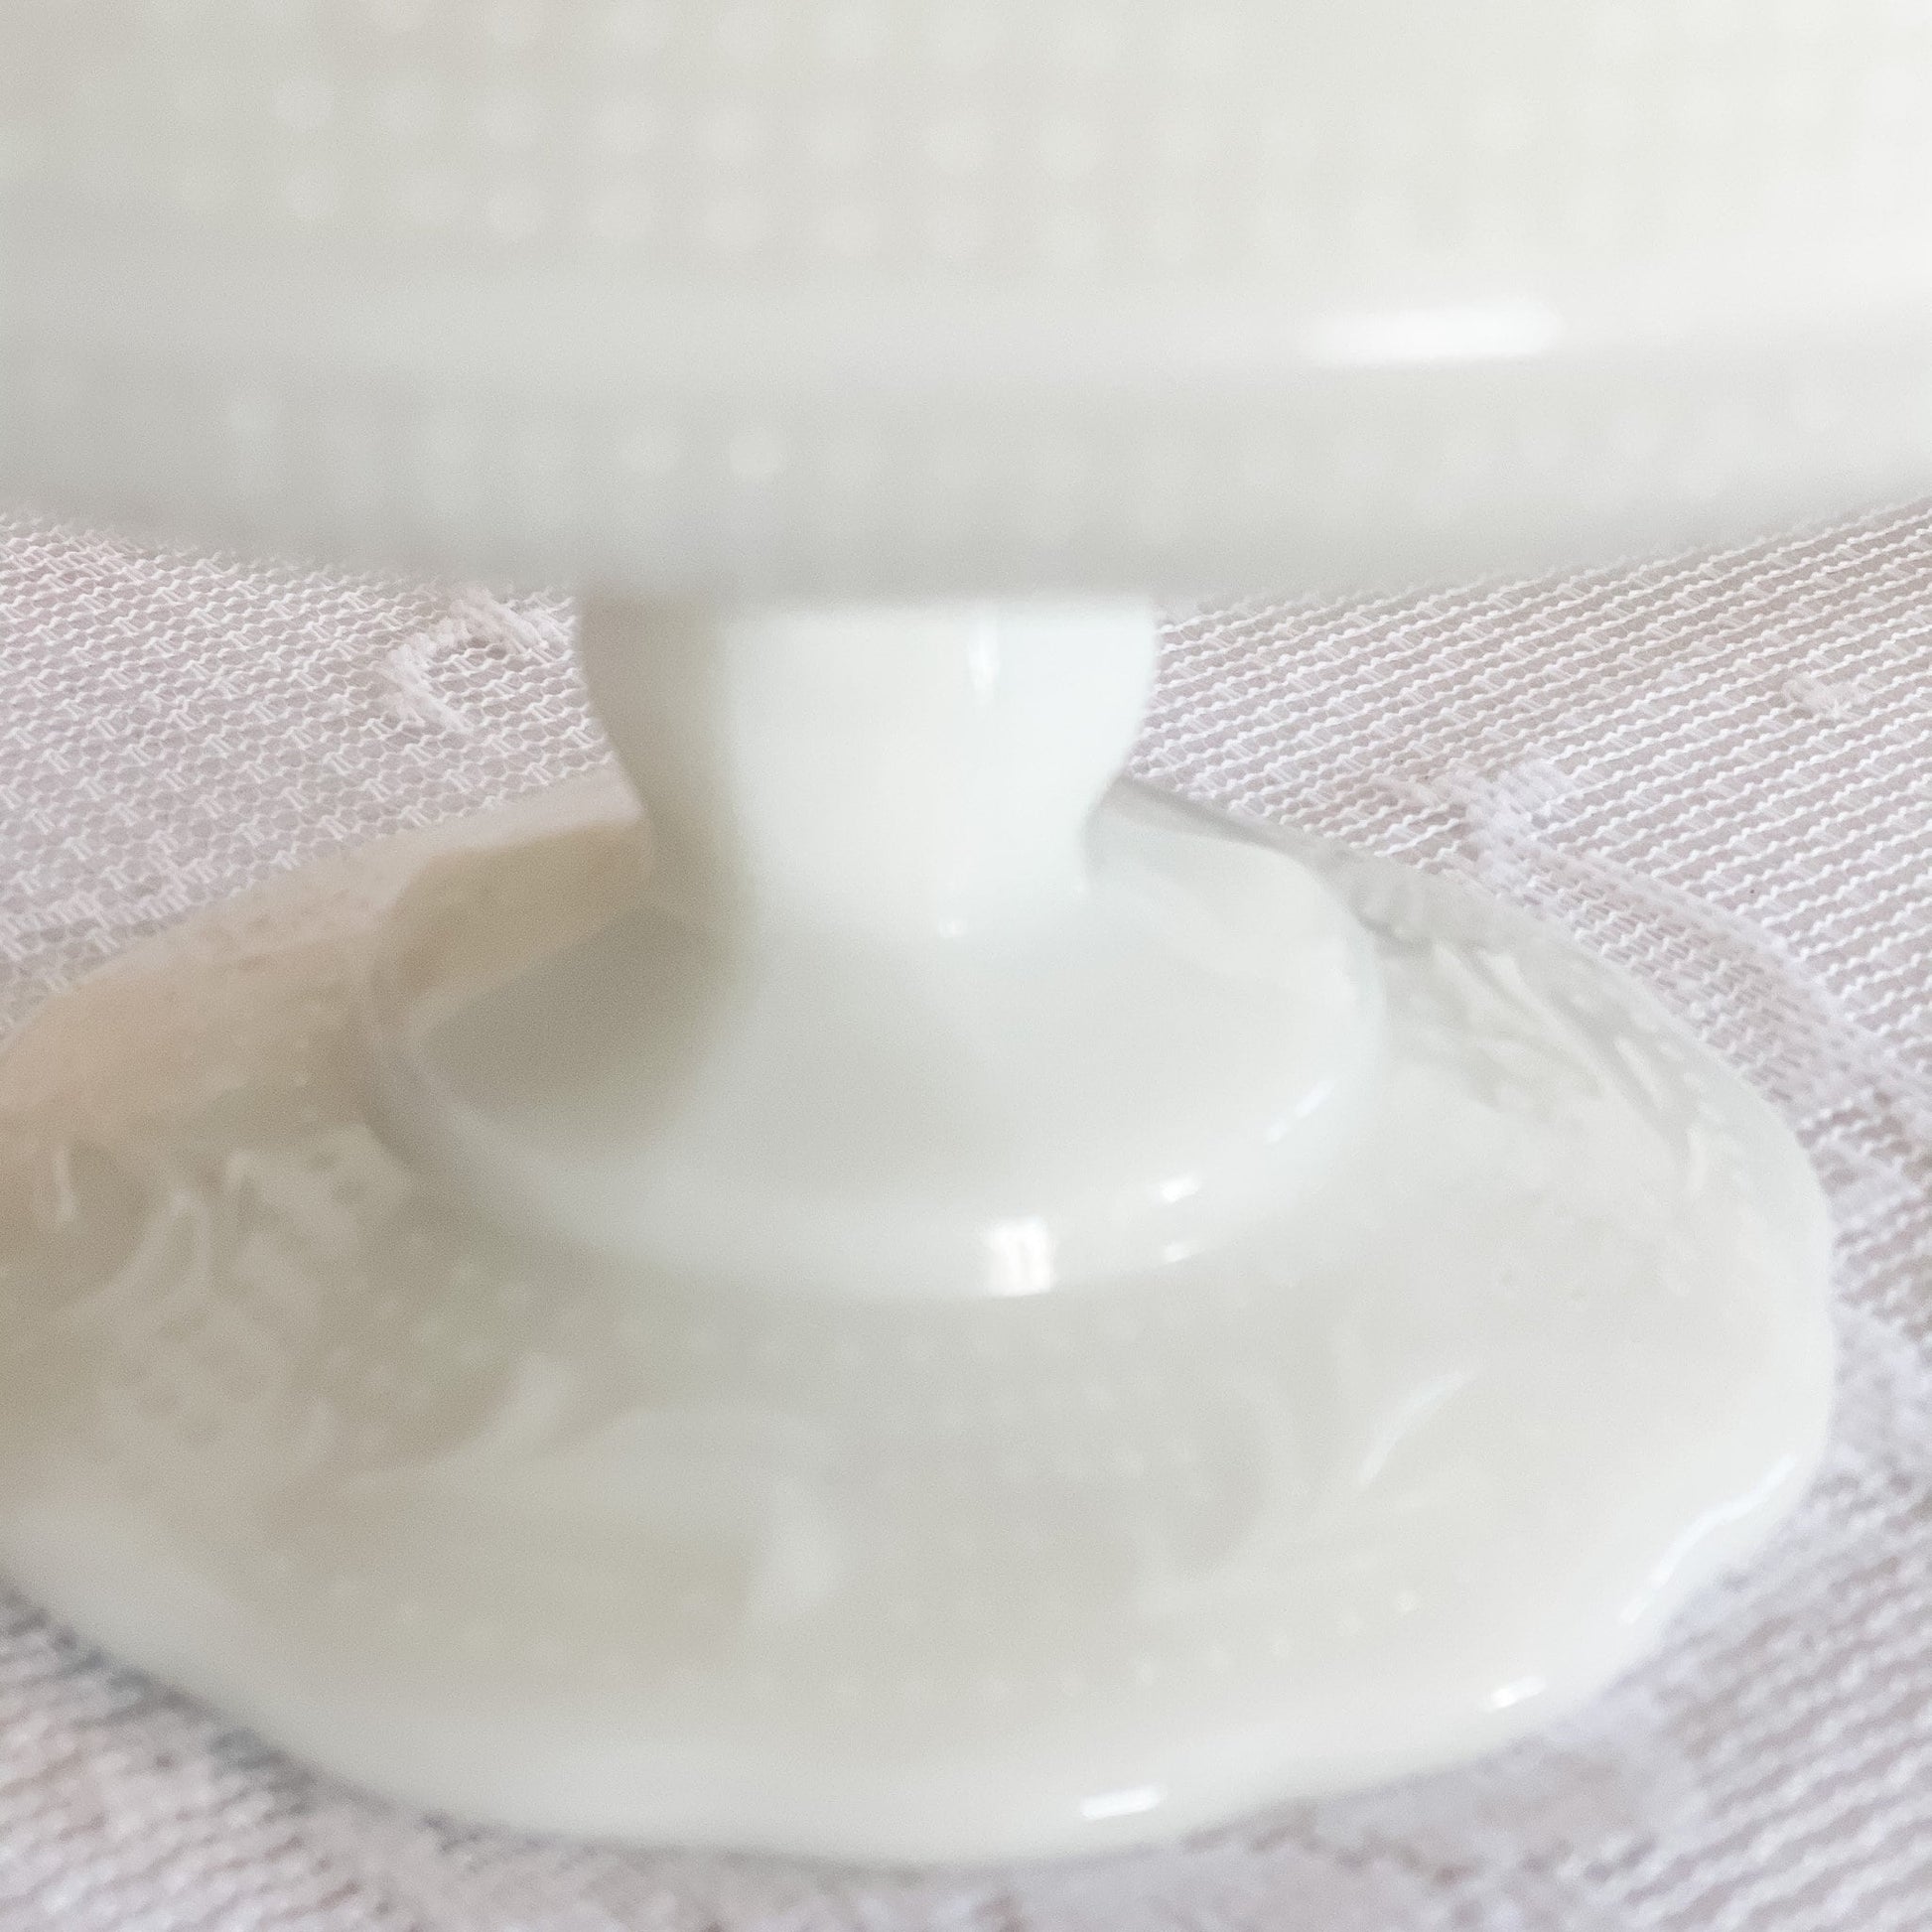 Scented Candles, Milk Glass, Best Friend Gifts, Coastal Cottage Decor